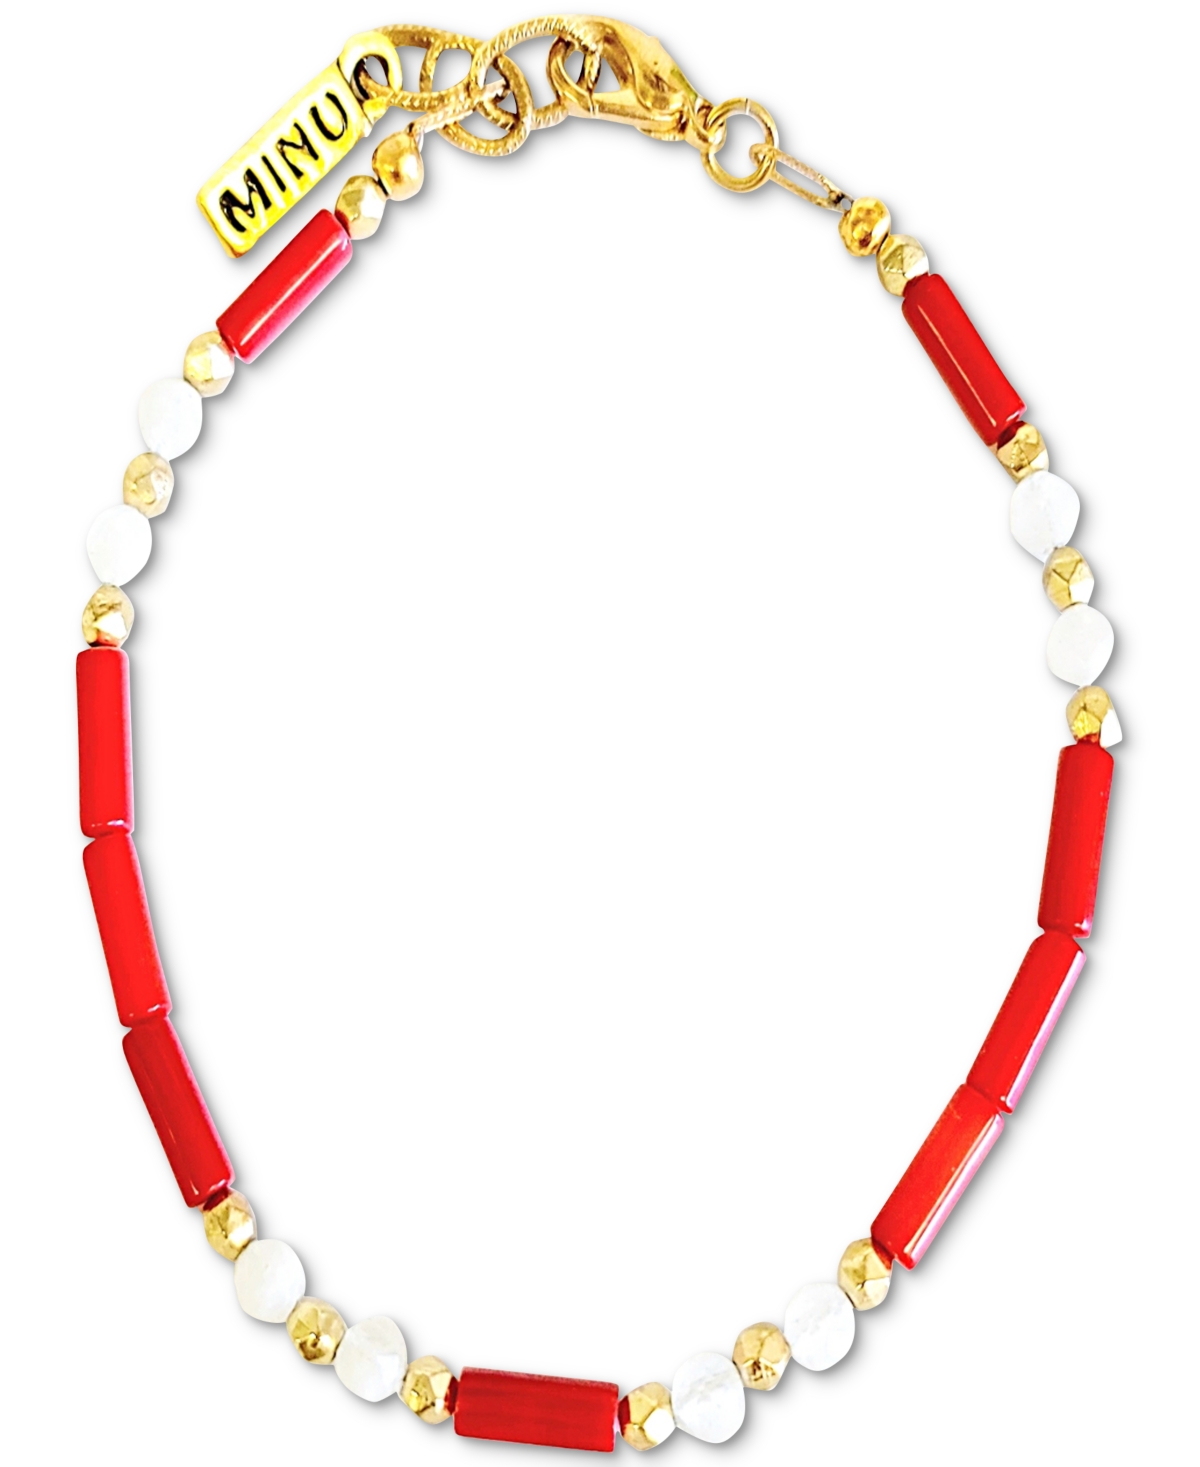 Gold-Tone Moonstone & Red Coral Beaded Flex Bracelet - Red White